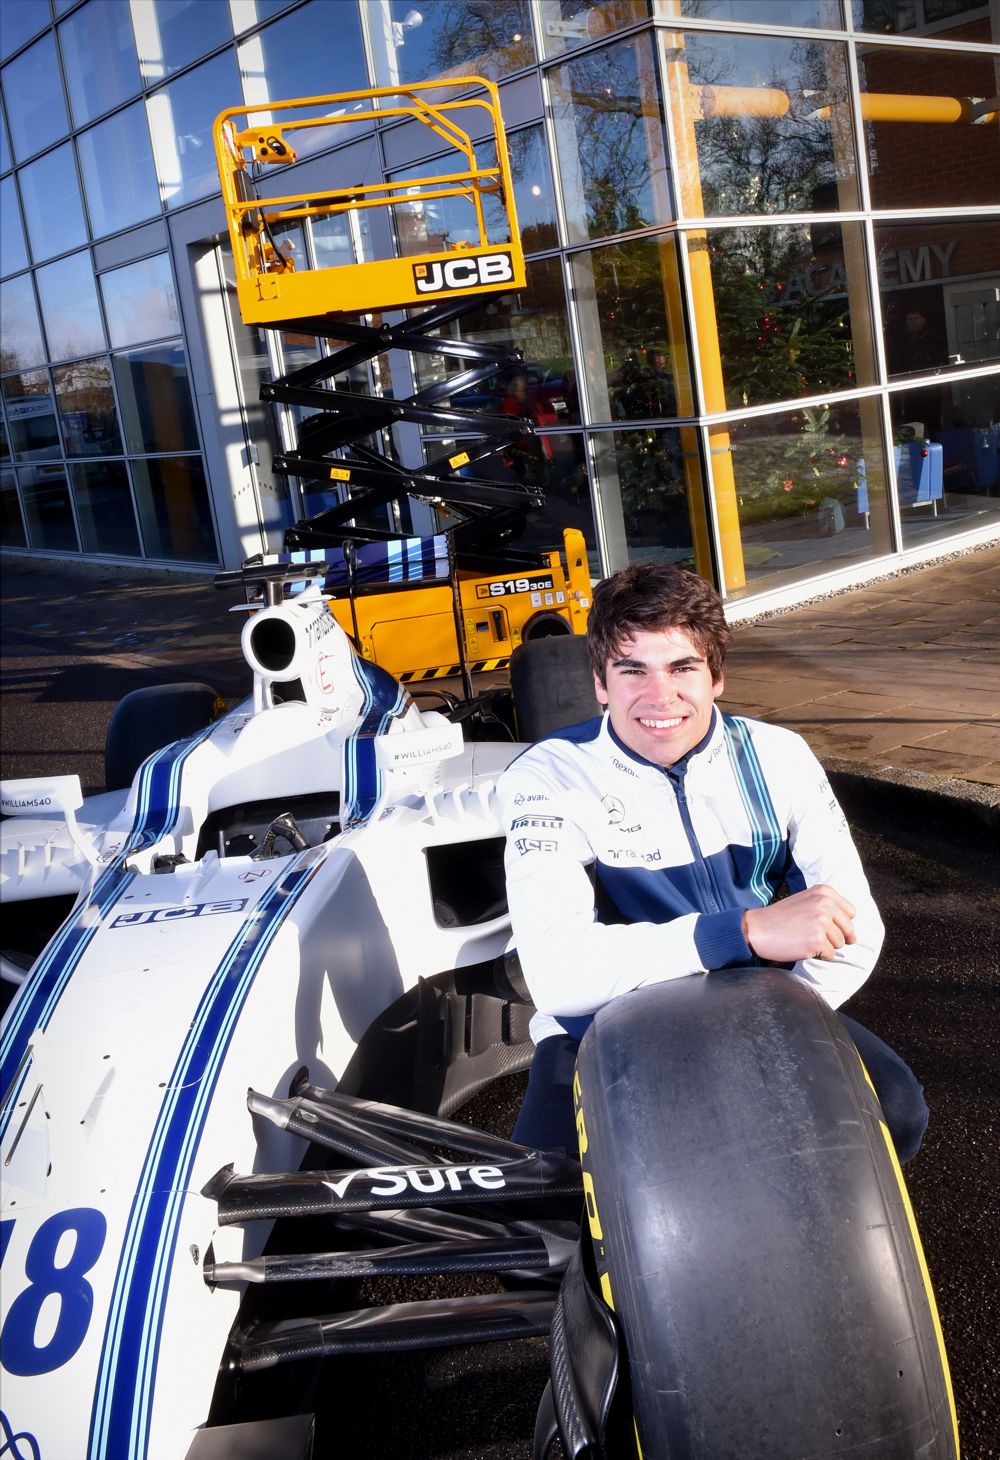 Williams Martini Racing Formula One driver Lance Stroll today shared some of the secrets of his sporting success during a visit to JCB and the JCB Academy.